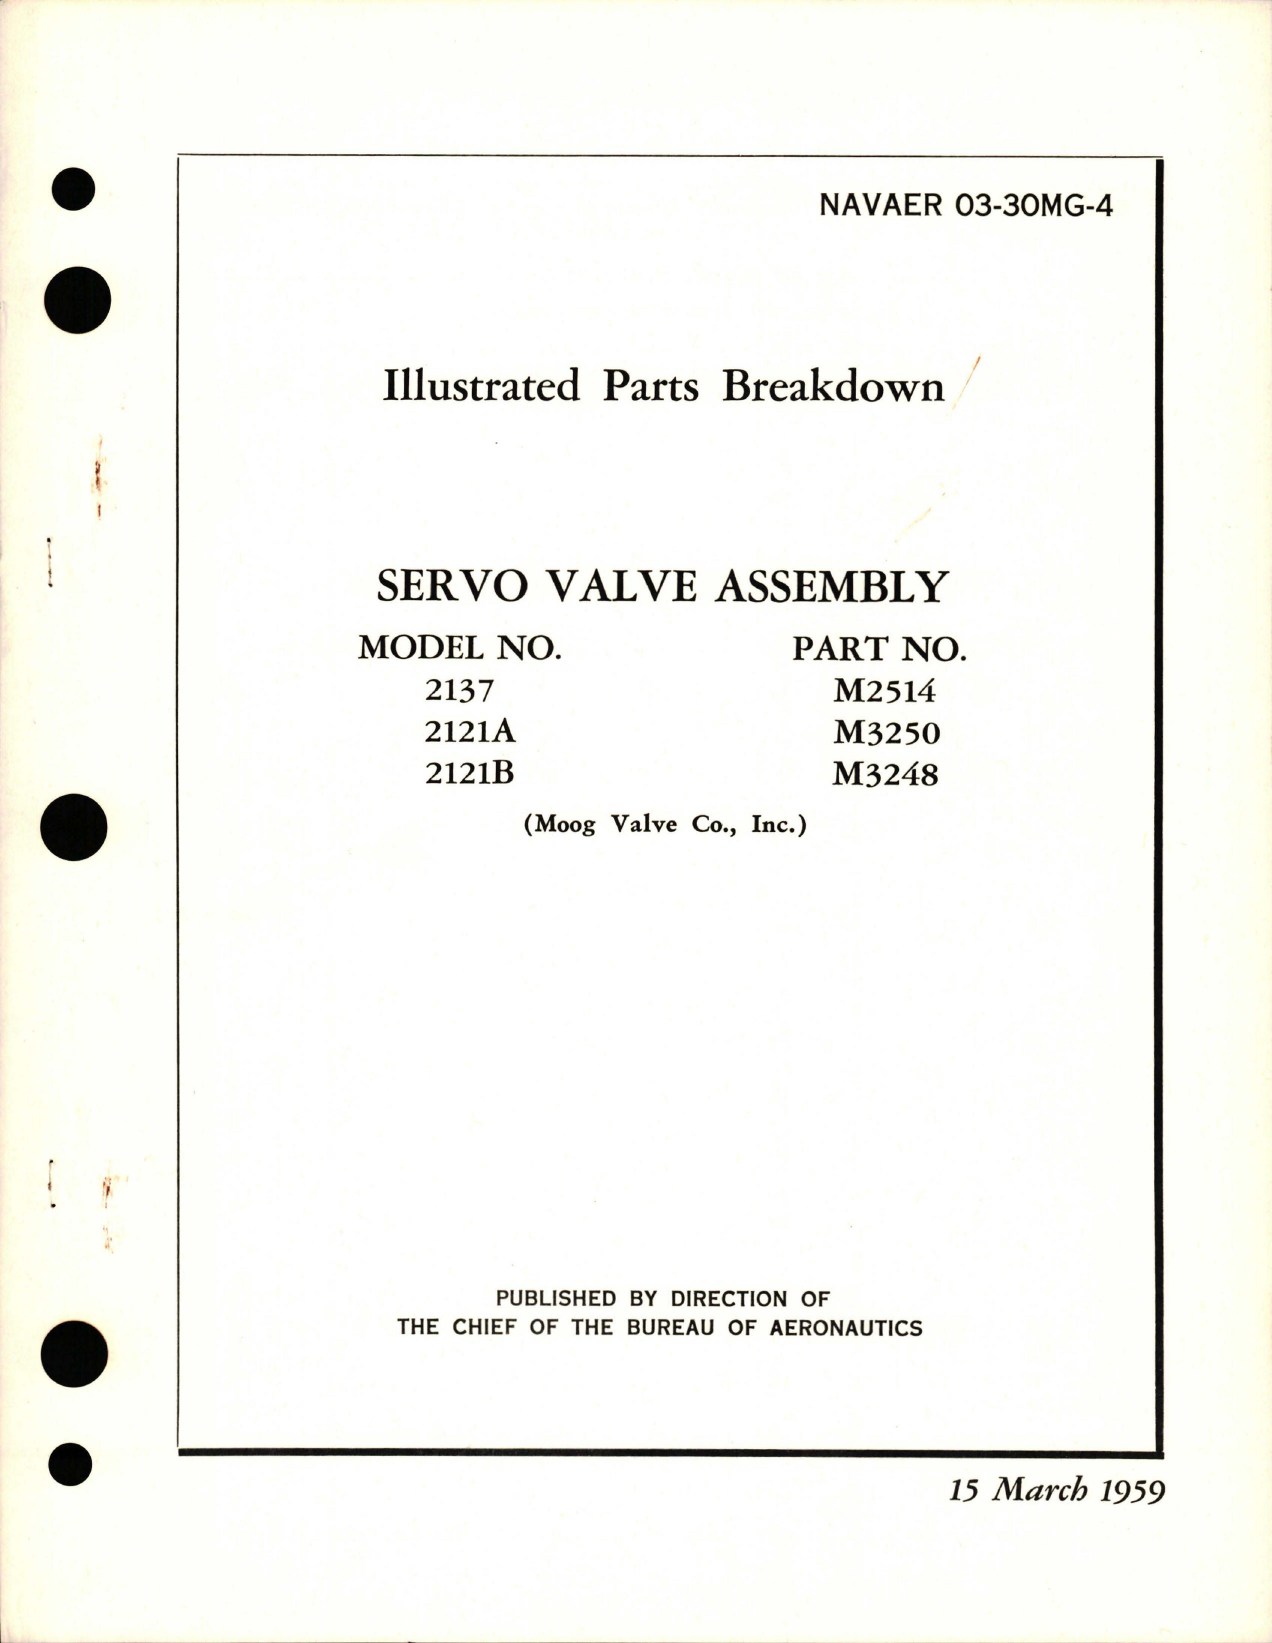 Sample page 1 from AirCorps Library document: Illustrated Parts Breakdown for Servo Valve Assembly - Models 2137, 2121A, and 2121B - Parts M2514, M3250, and M3248